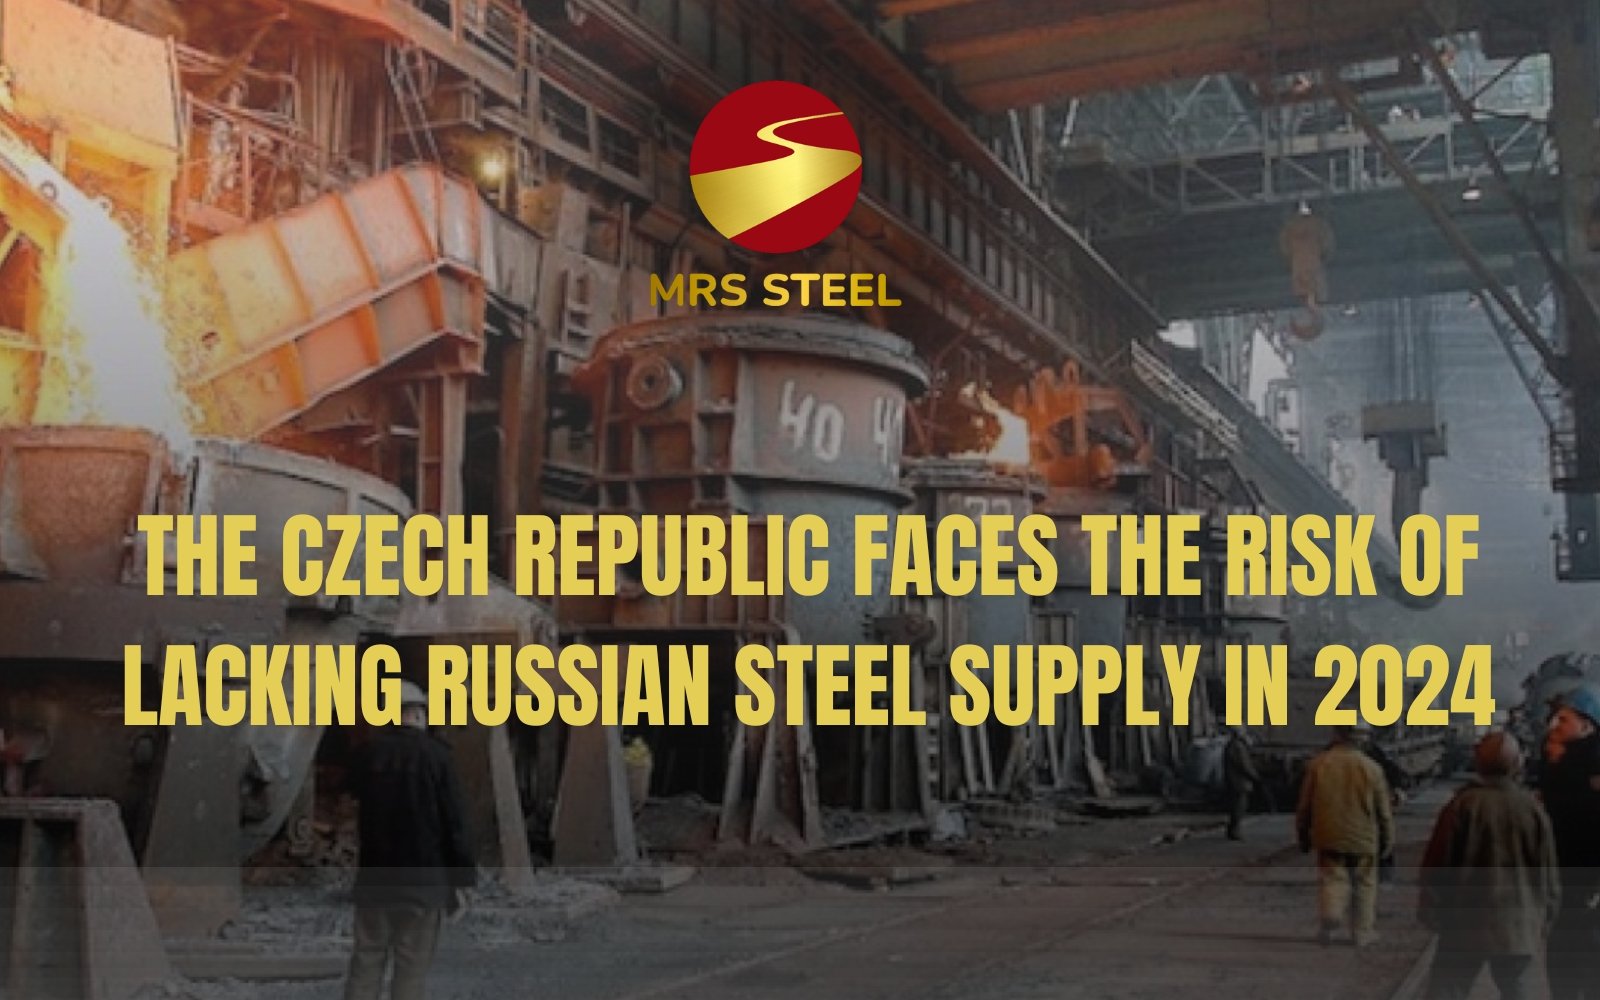 The Czech Republic faces the risk of lacking Russian steel supply in 2024